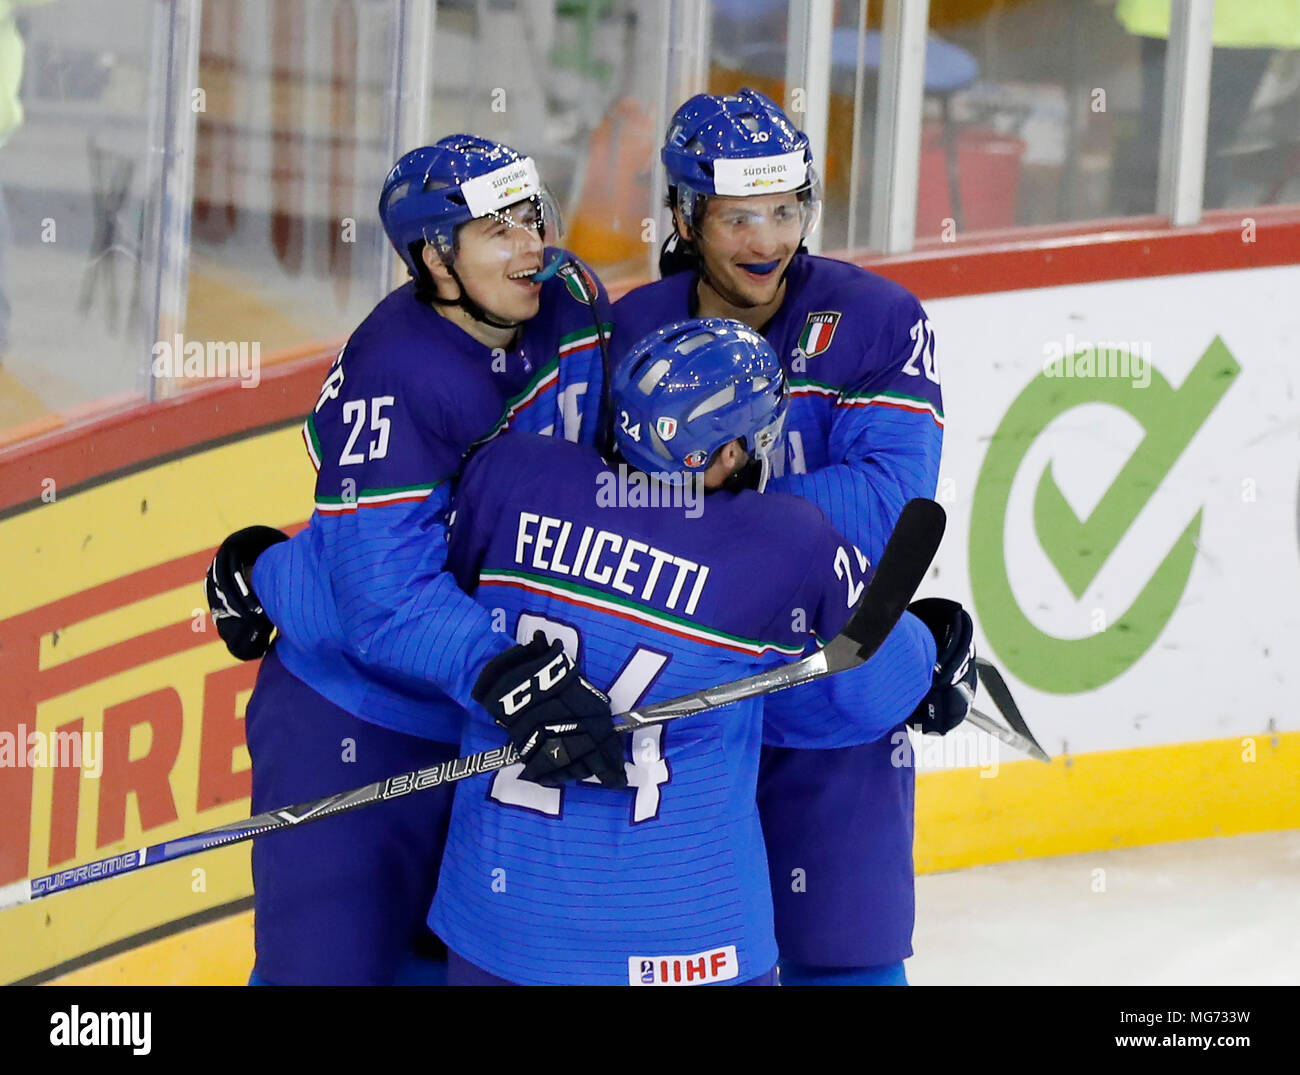 Budapest, Hungary, 27 April 2018. (l-r) Alex Lambacher of Italy, Luca  Felicetti of Italy and Ivan Deluca of Italy celebrate the first Italian  score during the 2018 IIHF Ice Hockey World Championship